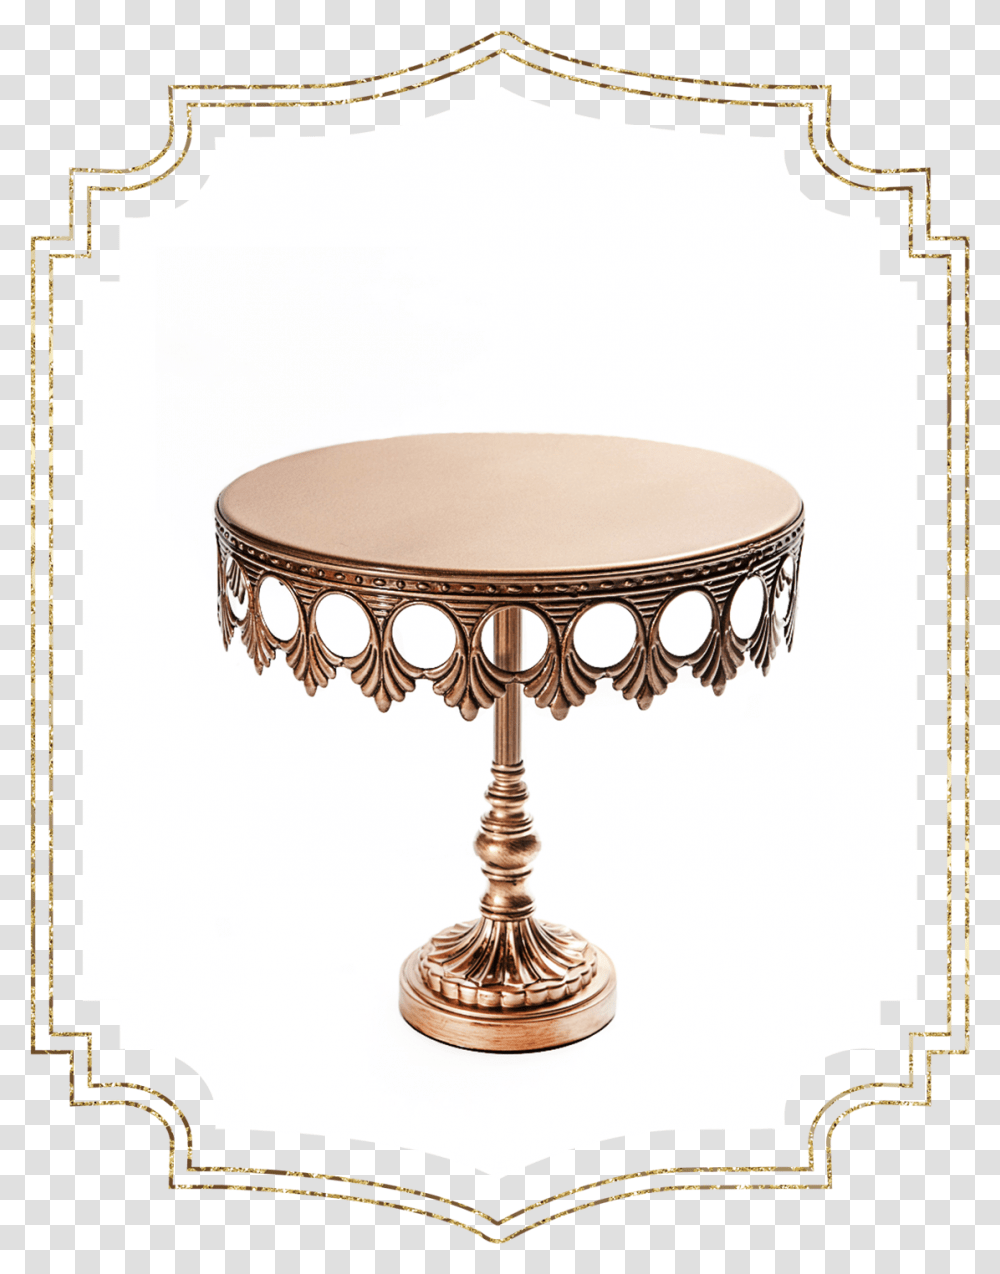 Shop Preview Antique Gold Crown Cake Stand Stand For A Crown, Lamp, Bronze, Lampshade, Drum Transparent Png